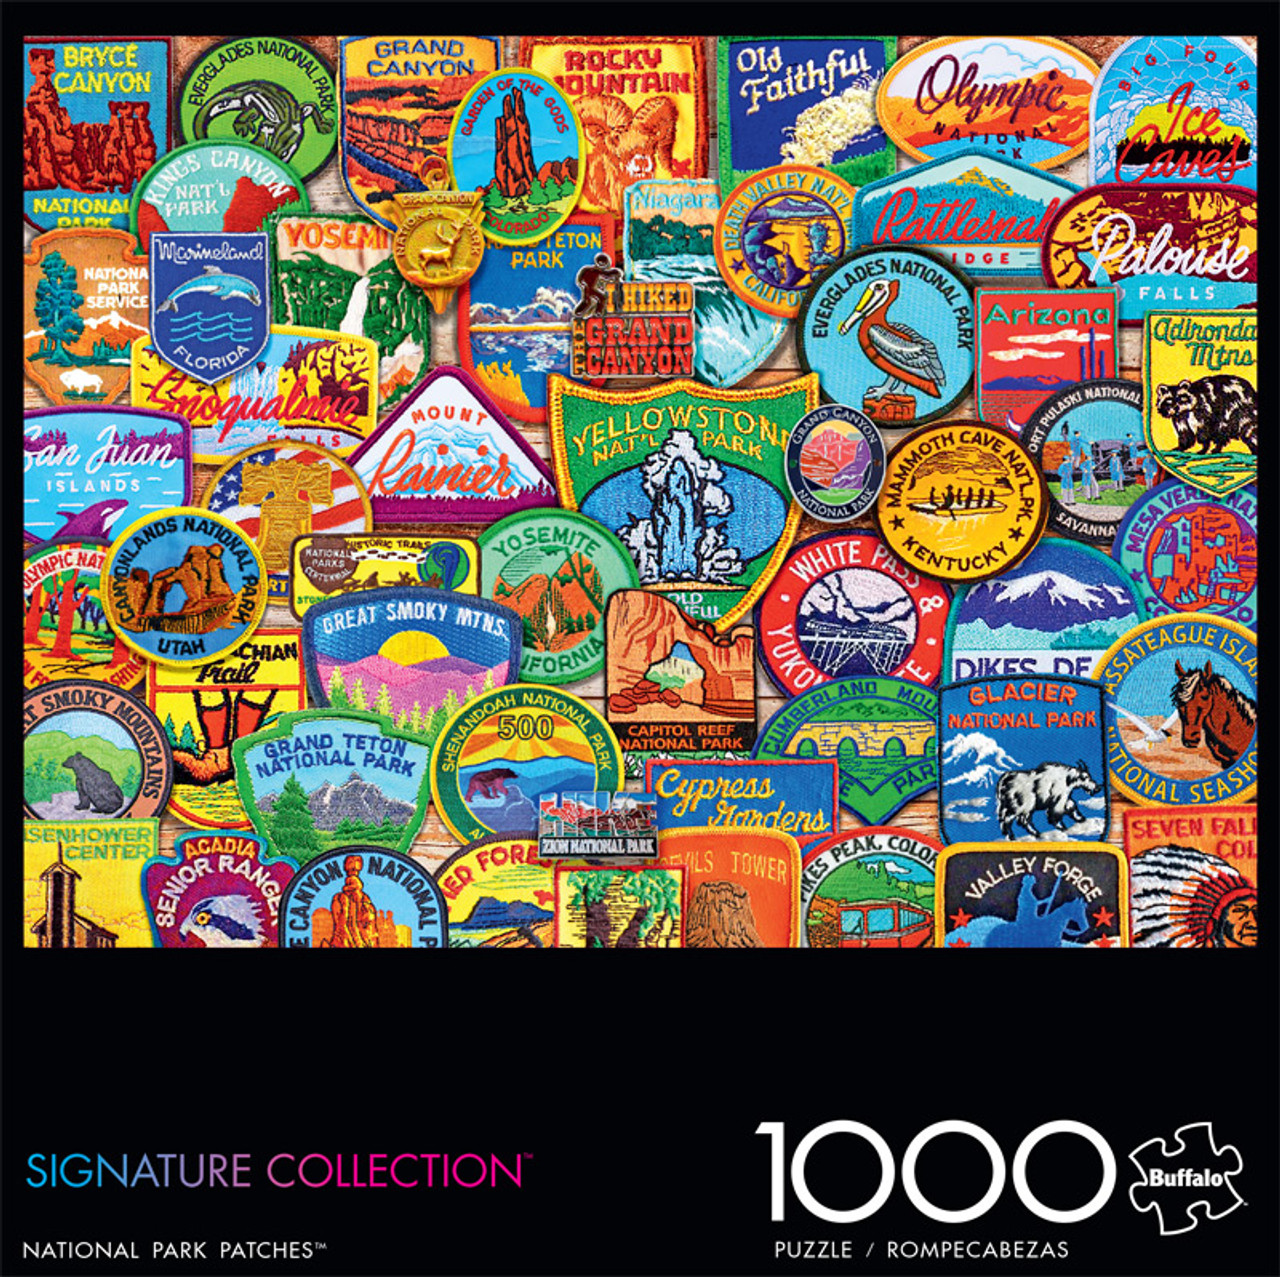 Signature Collection National Park Patches 1000 Piece Jigsaw Puzzle